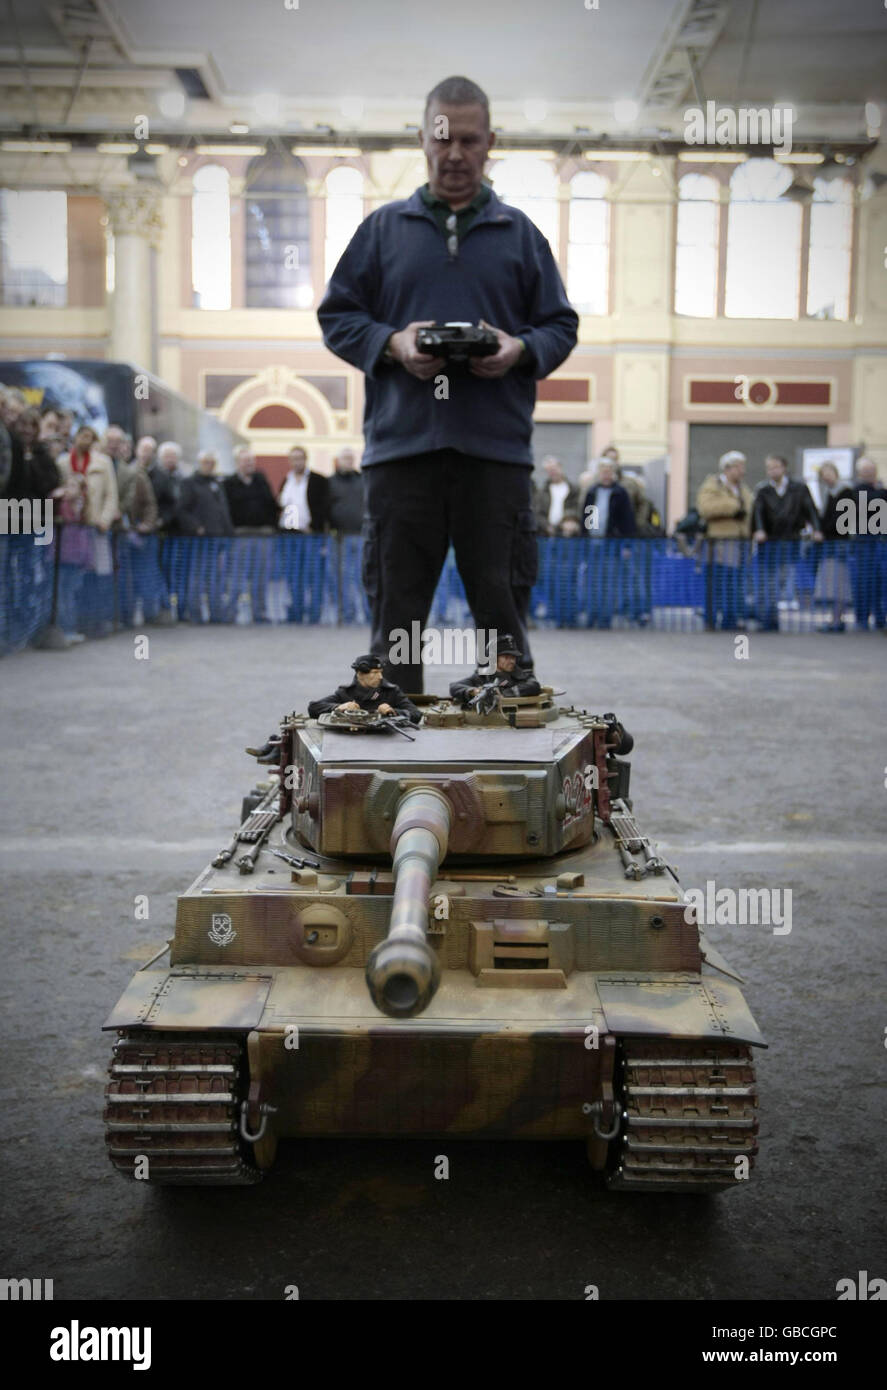 An exhibitor stands behind his remote controlled WW2 German Tiger tank at the London Model Engineering Exhibition 2009 at Alexandra Palace, London. Stock Photo